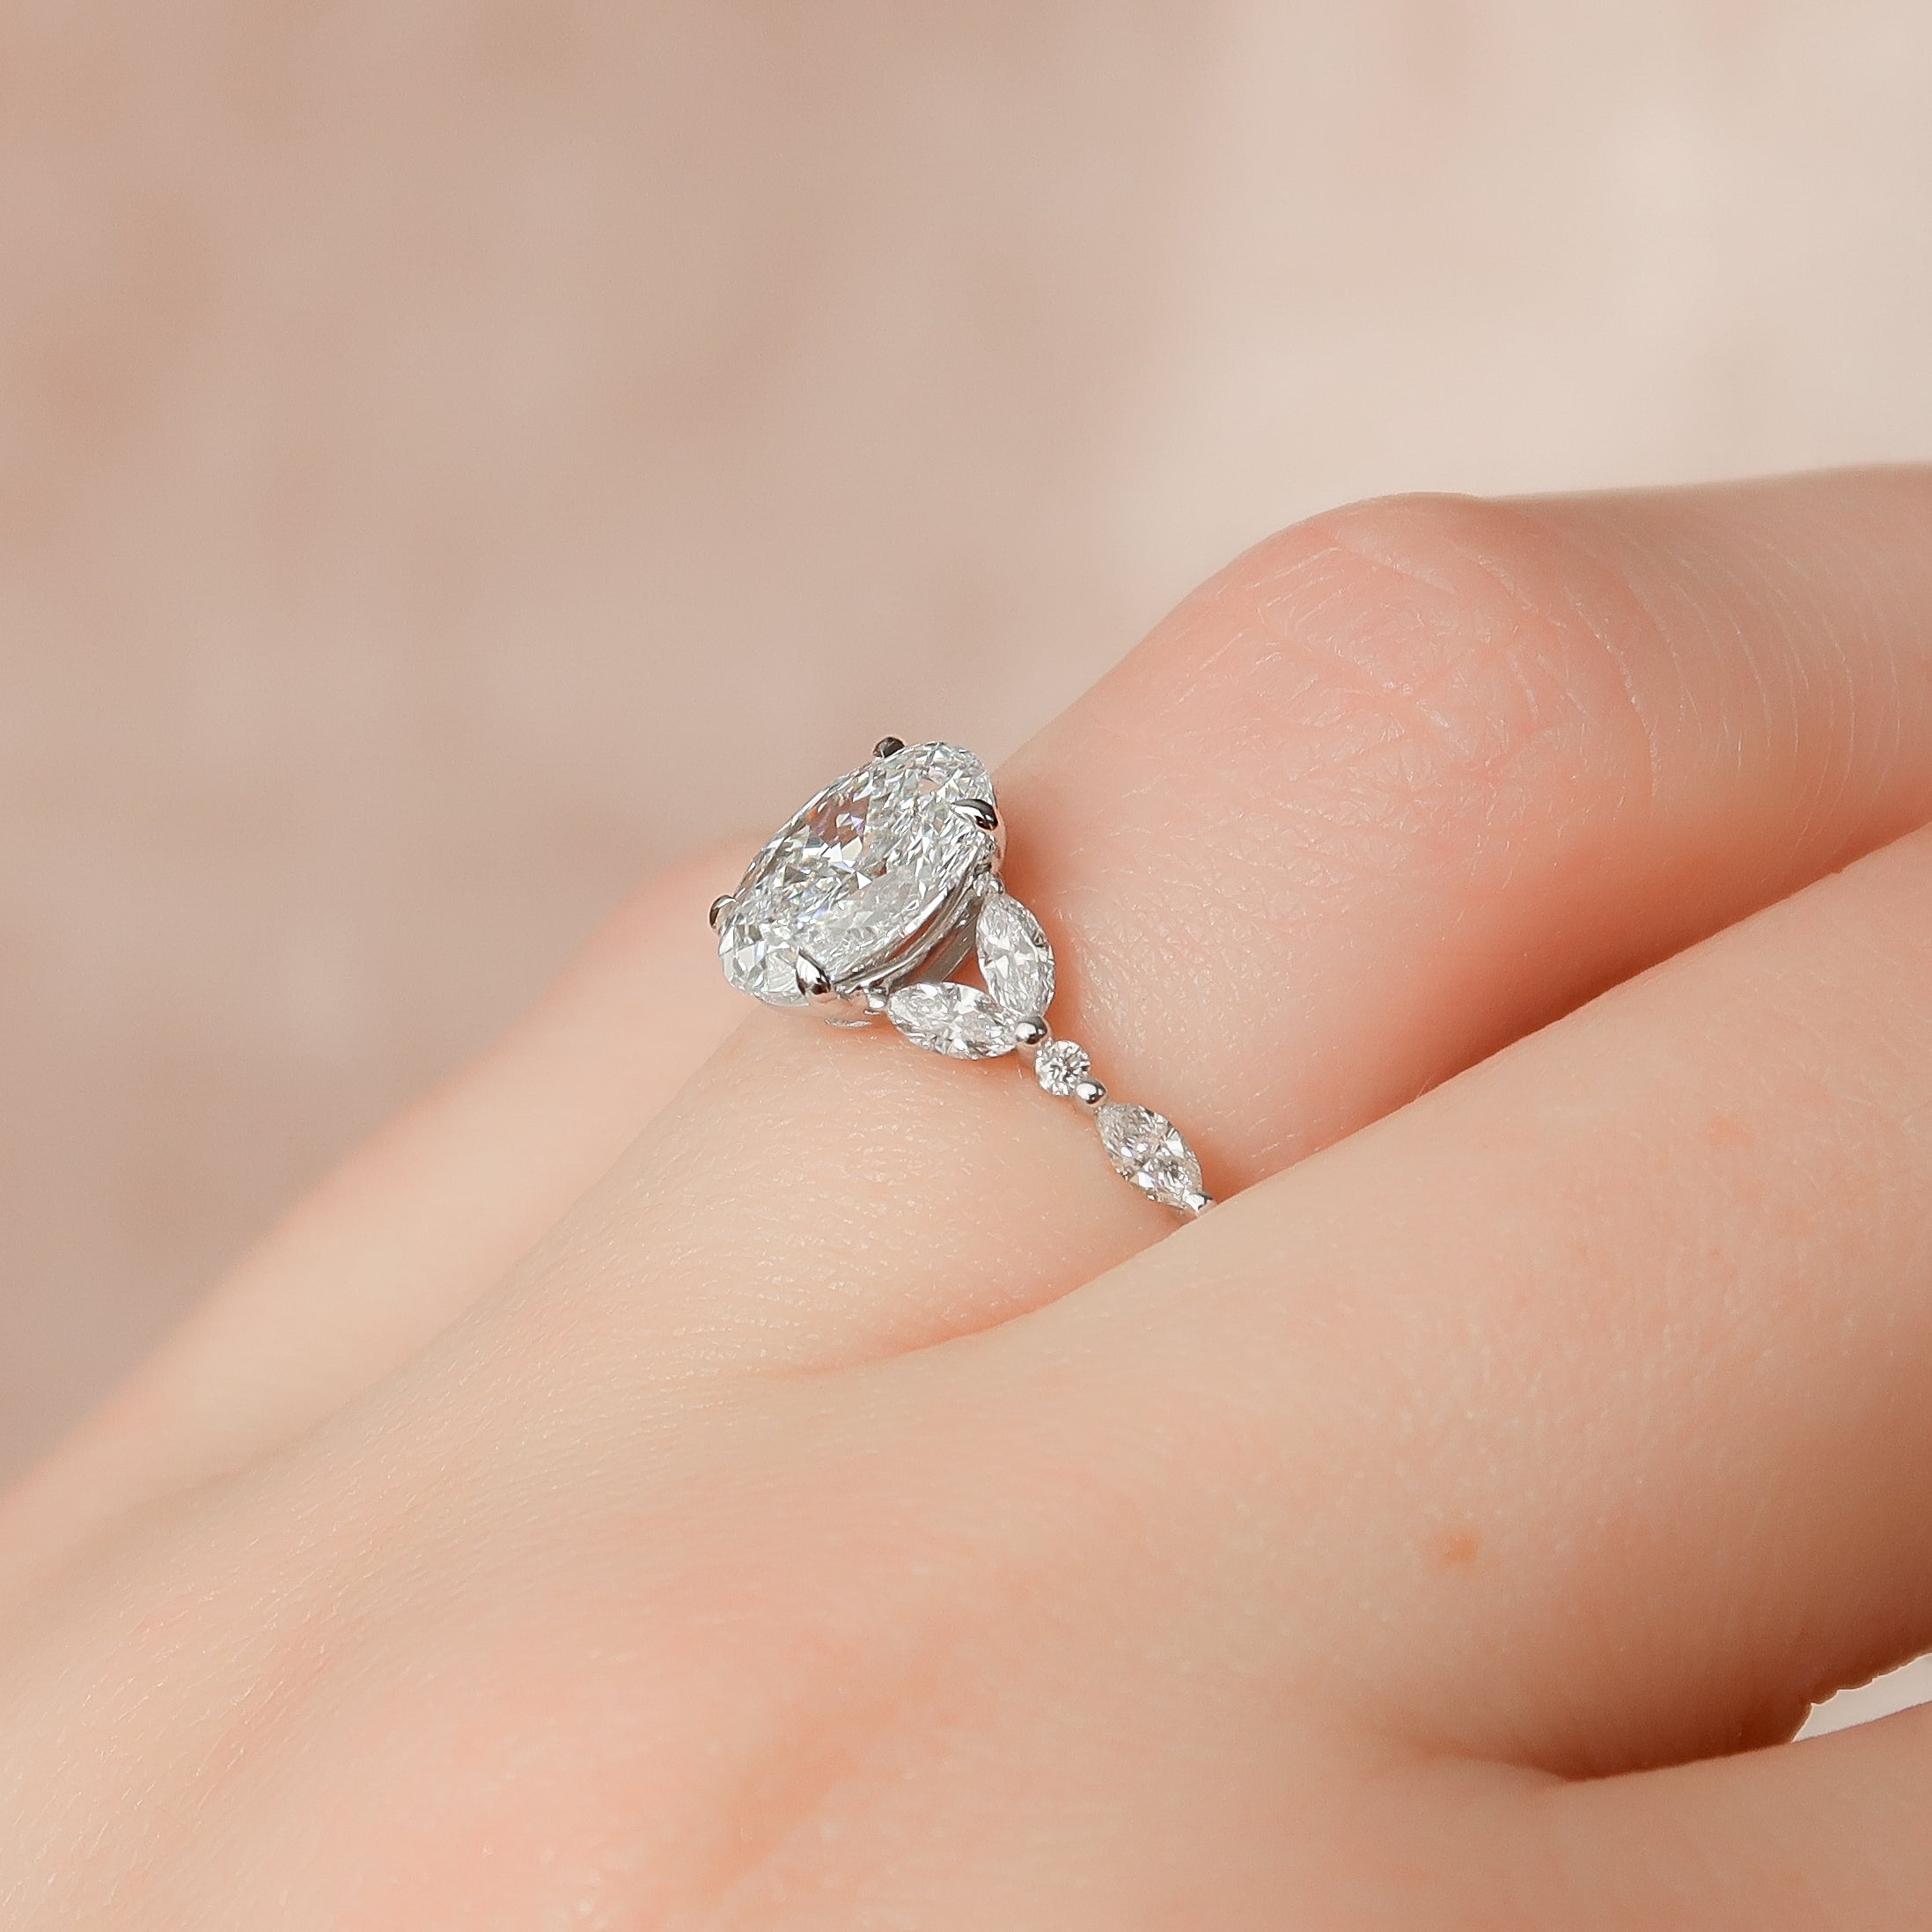 11 Exceptionally Unique Engagement Ring Ideas for the Modern Couple